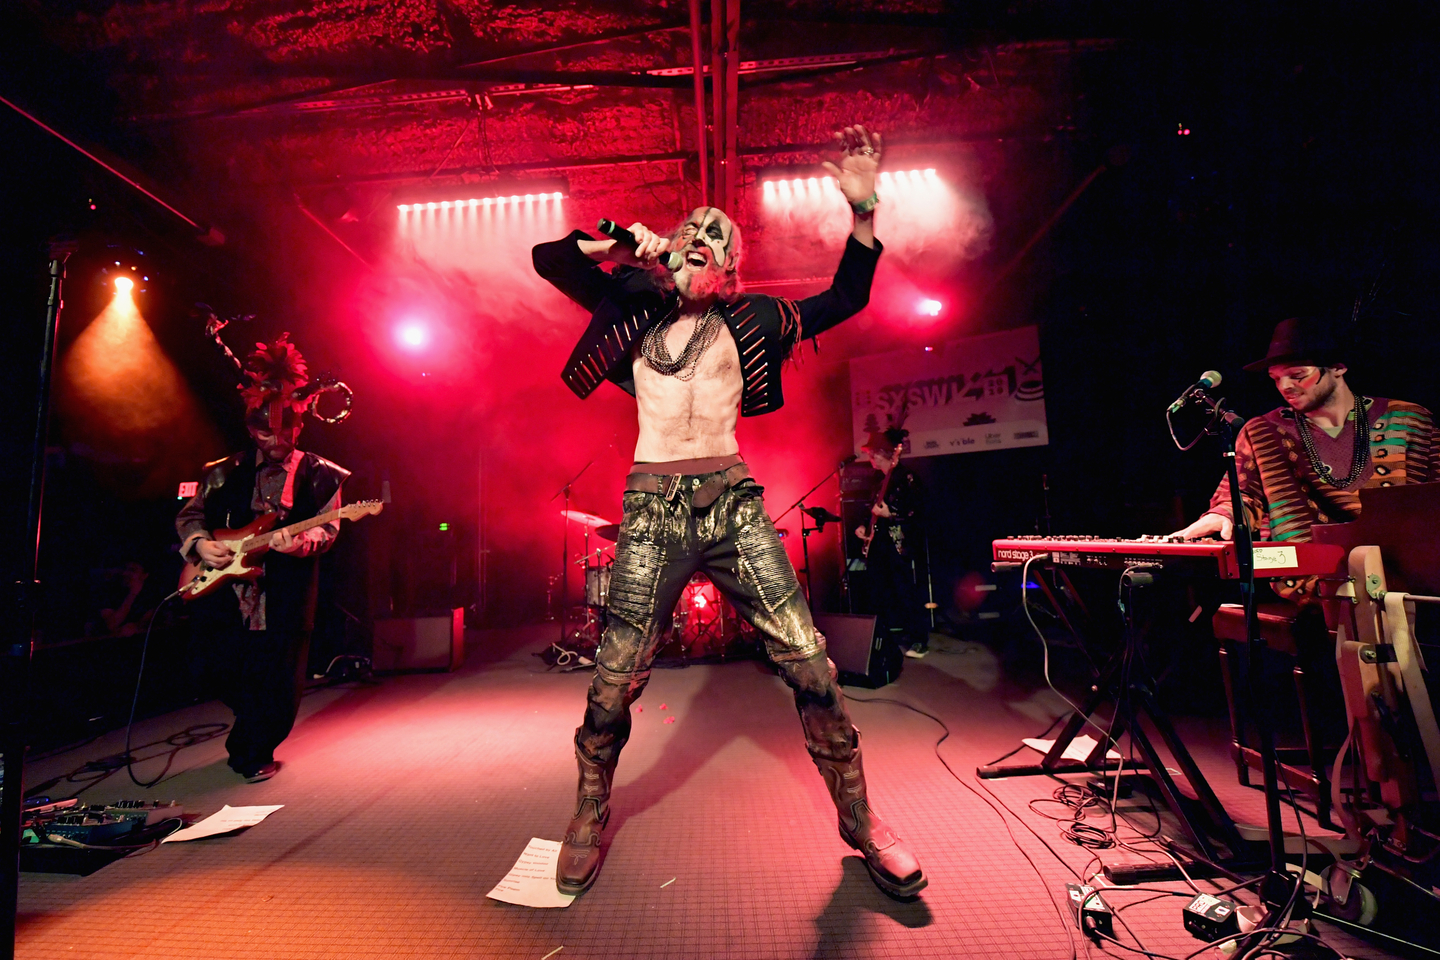 The Crazy World of Arthur Brown at Empire Garage, presented by LPR x Psycho Entertainment – Photo by Danny Matson/Getty Images for SXSW